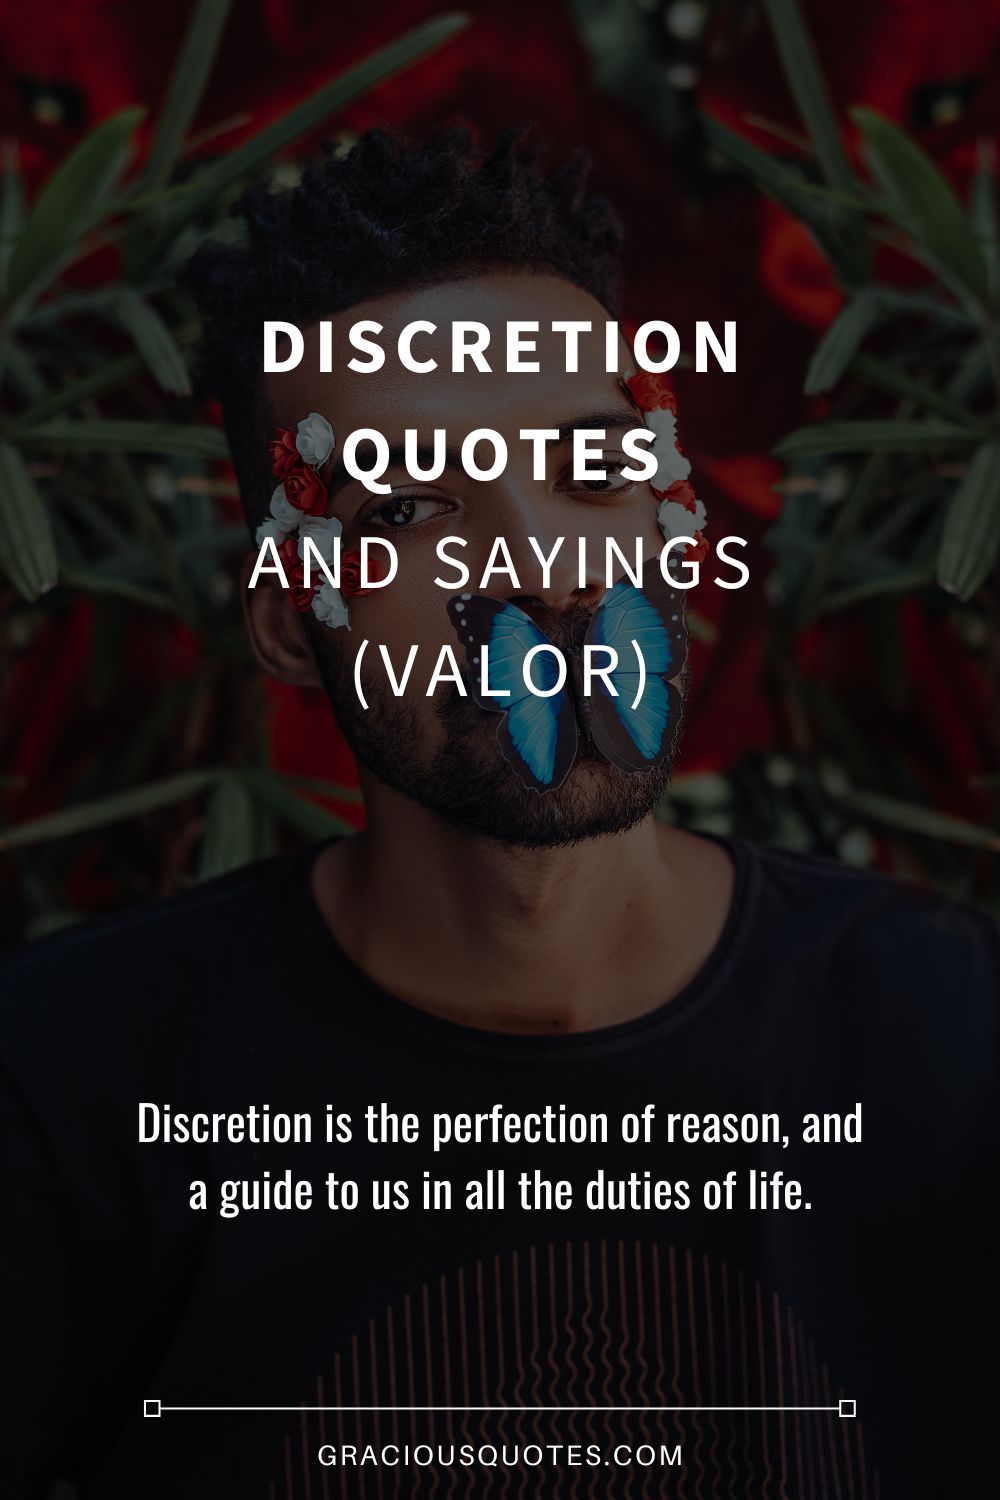 Discretion Quotes and Sayings (VALOR) - Gracious Quotes